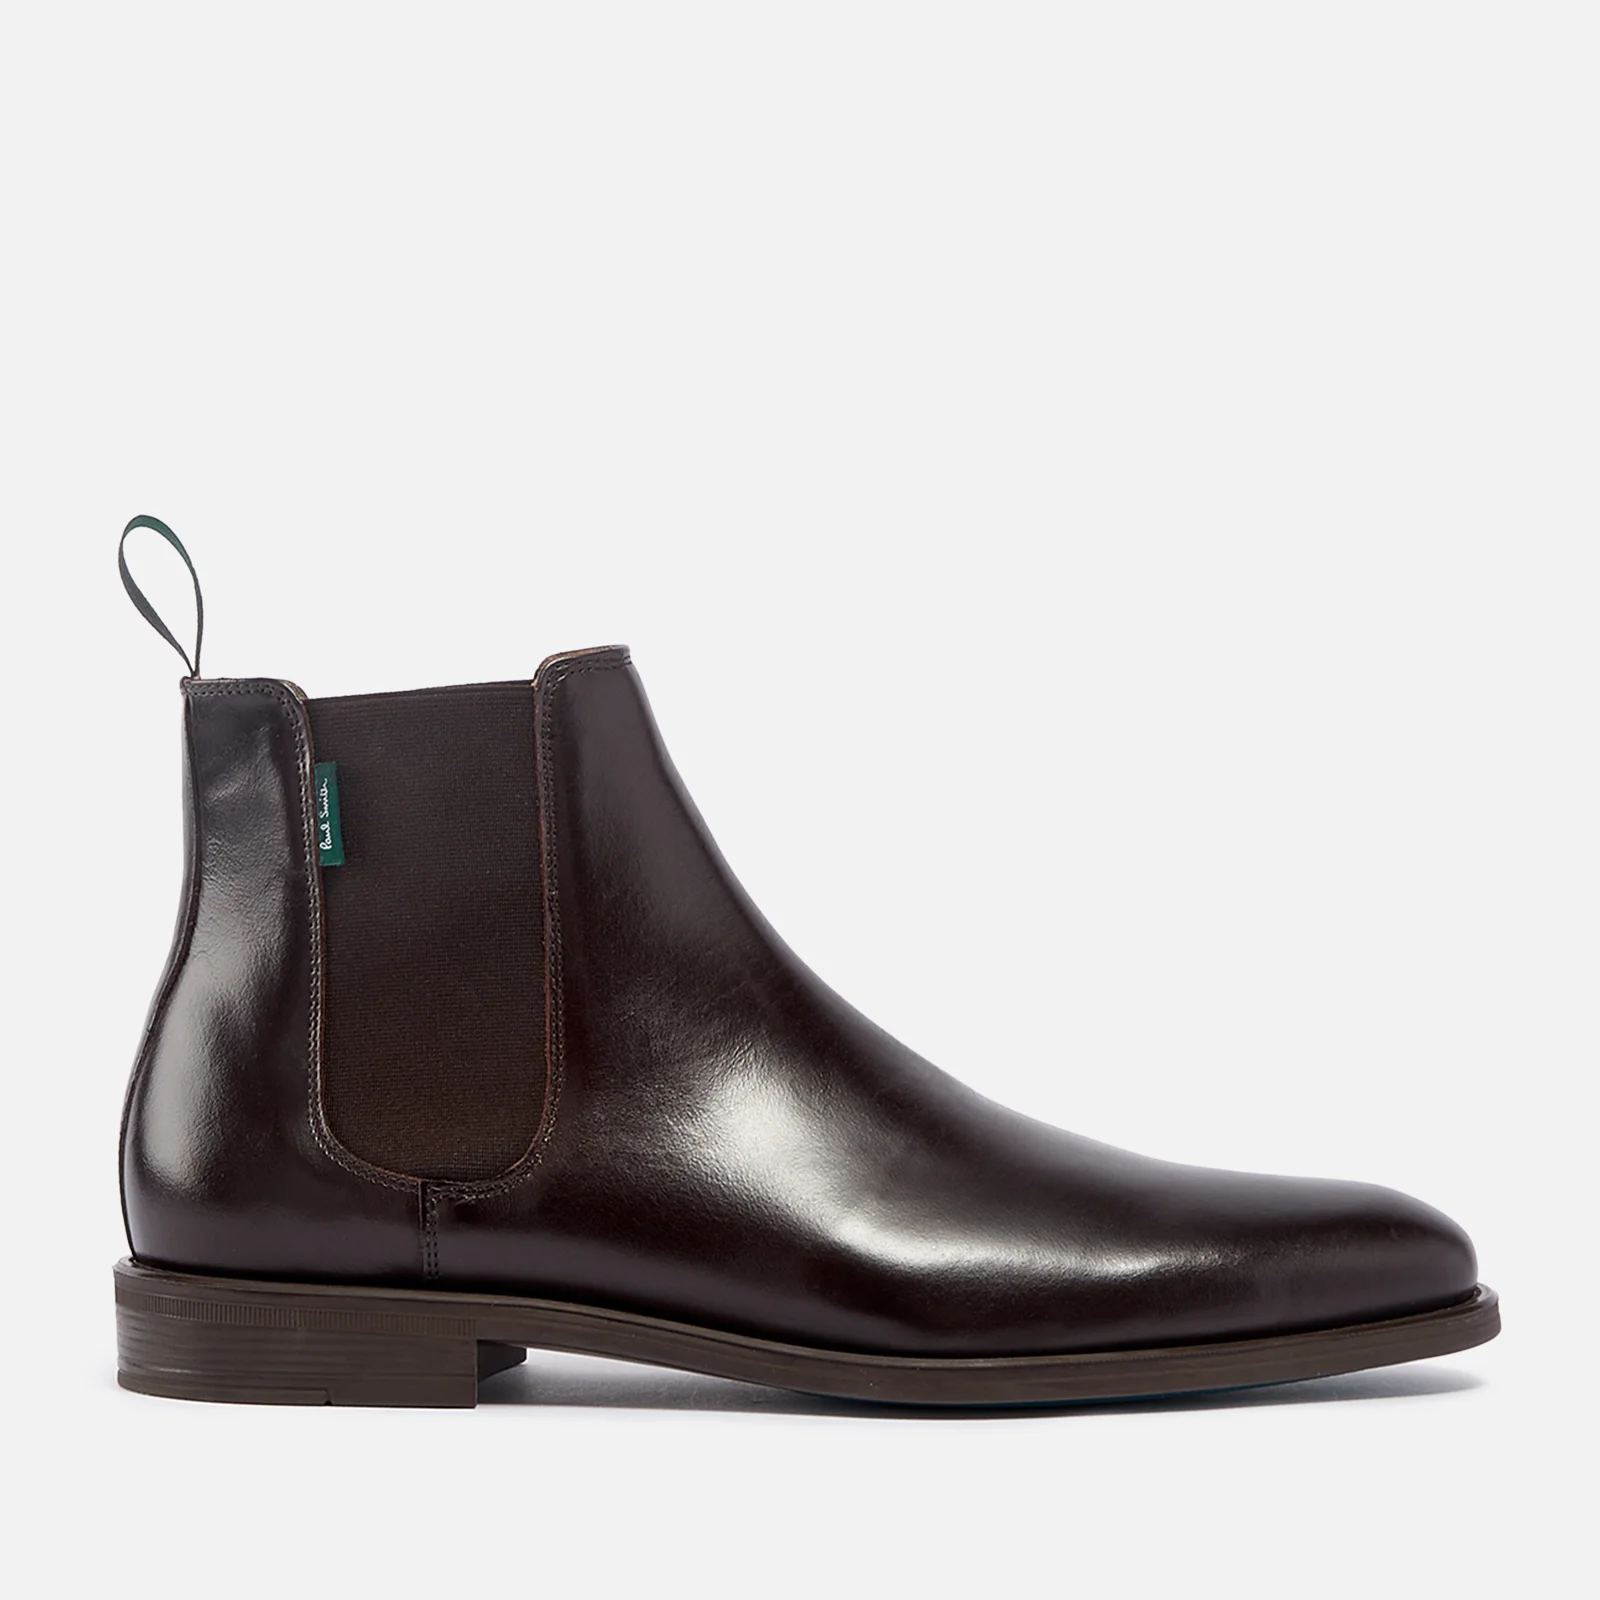 Paul Smith Cedric Leather Chelsea Boots Image 1